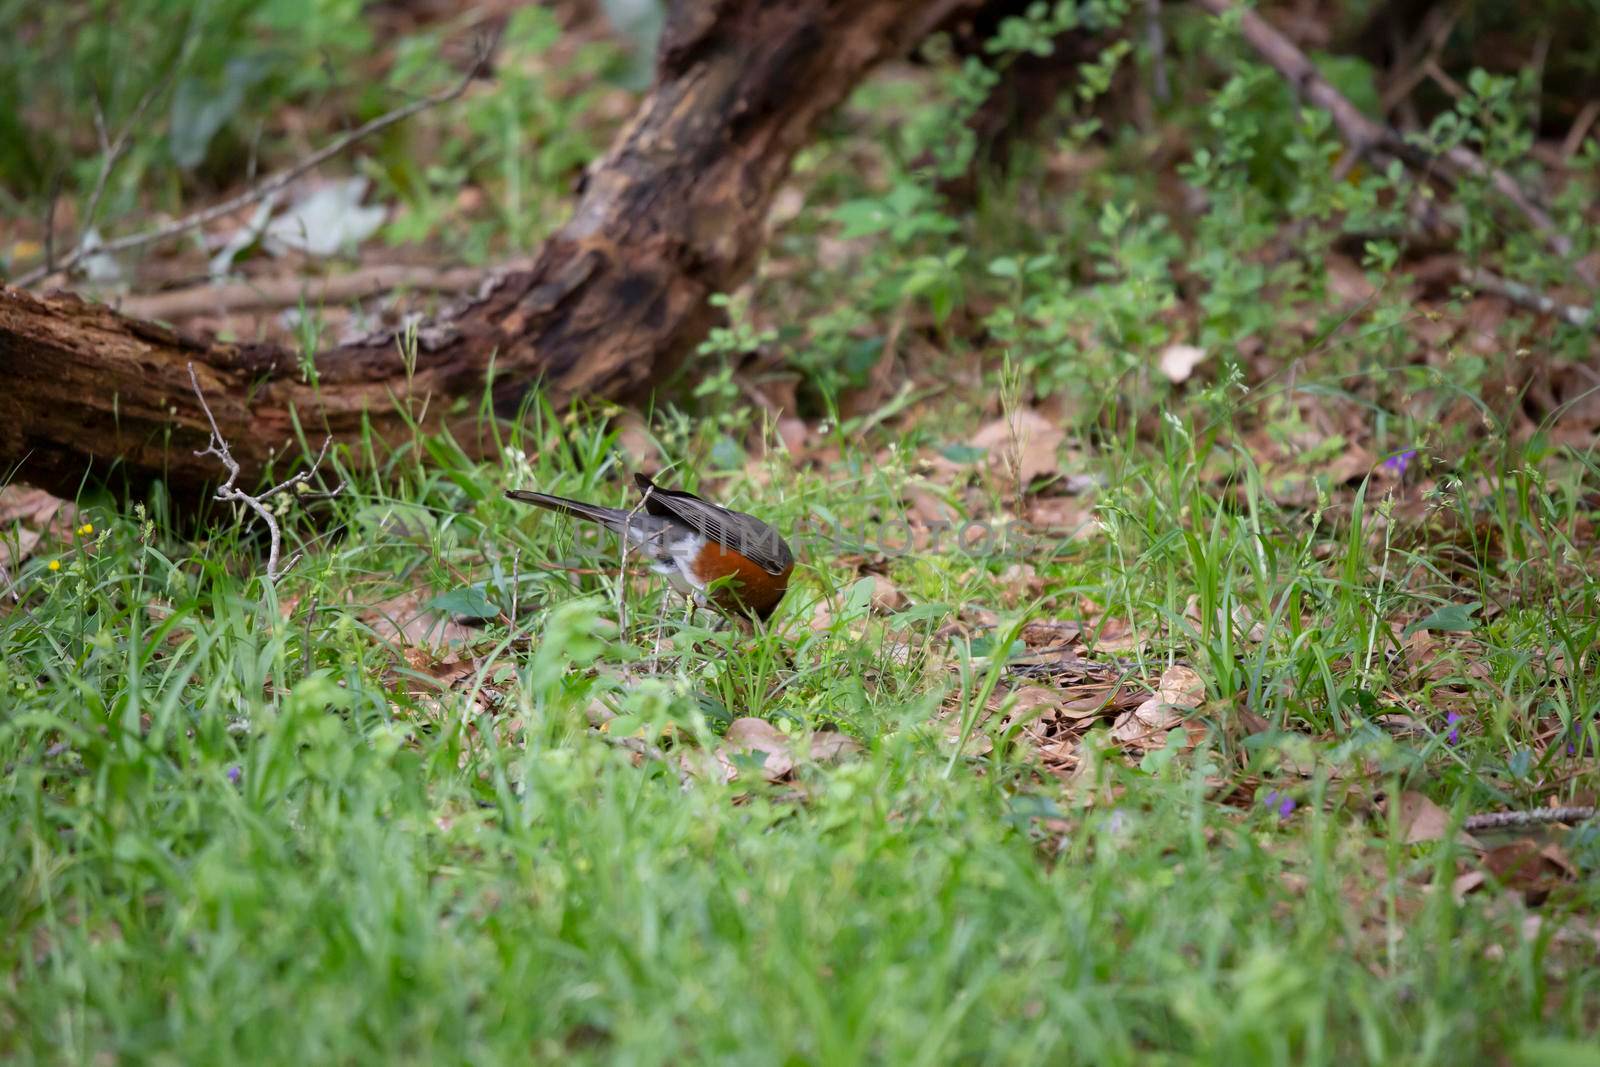 American robin (Turdus migratorius) foraging for insects in green grass on the ground